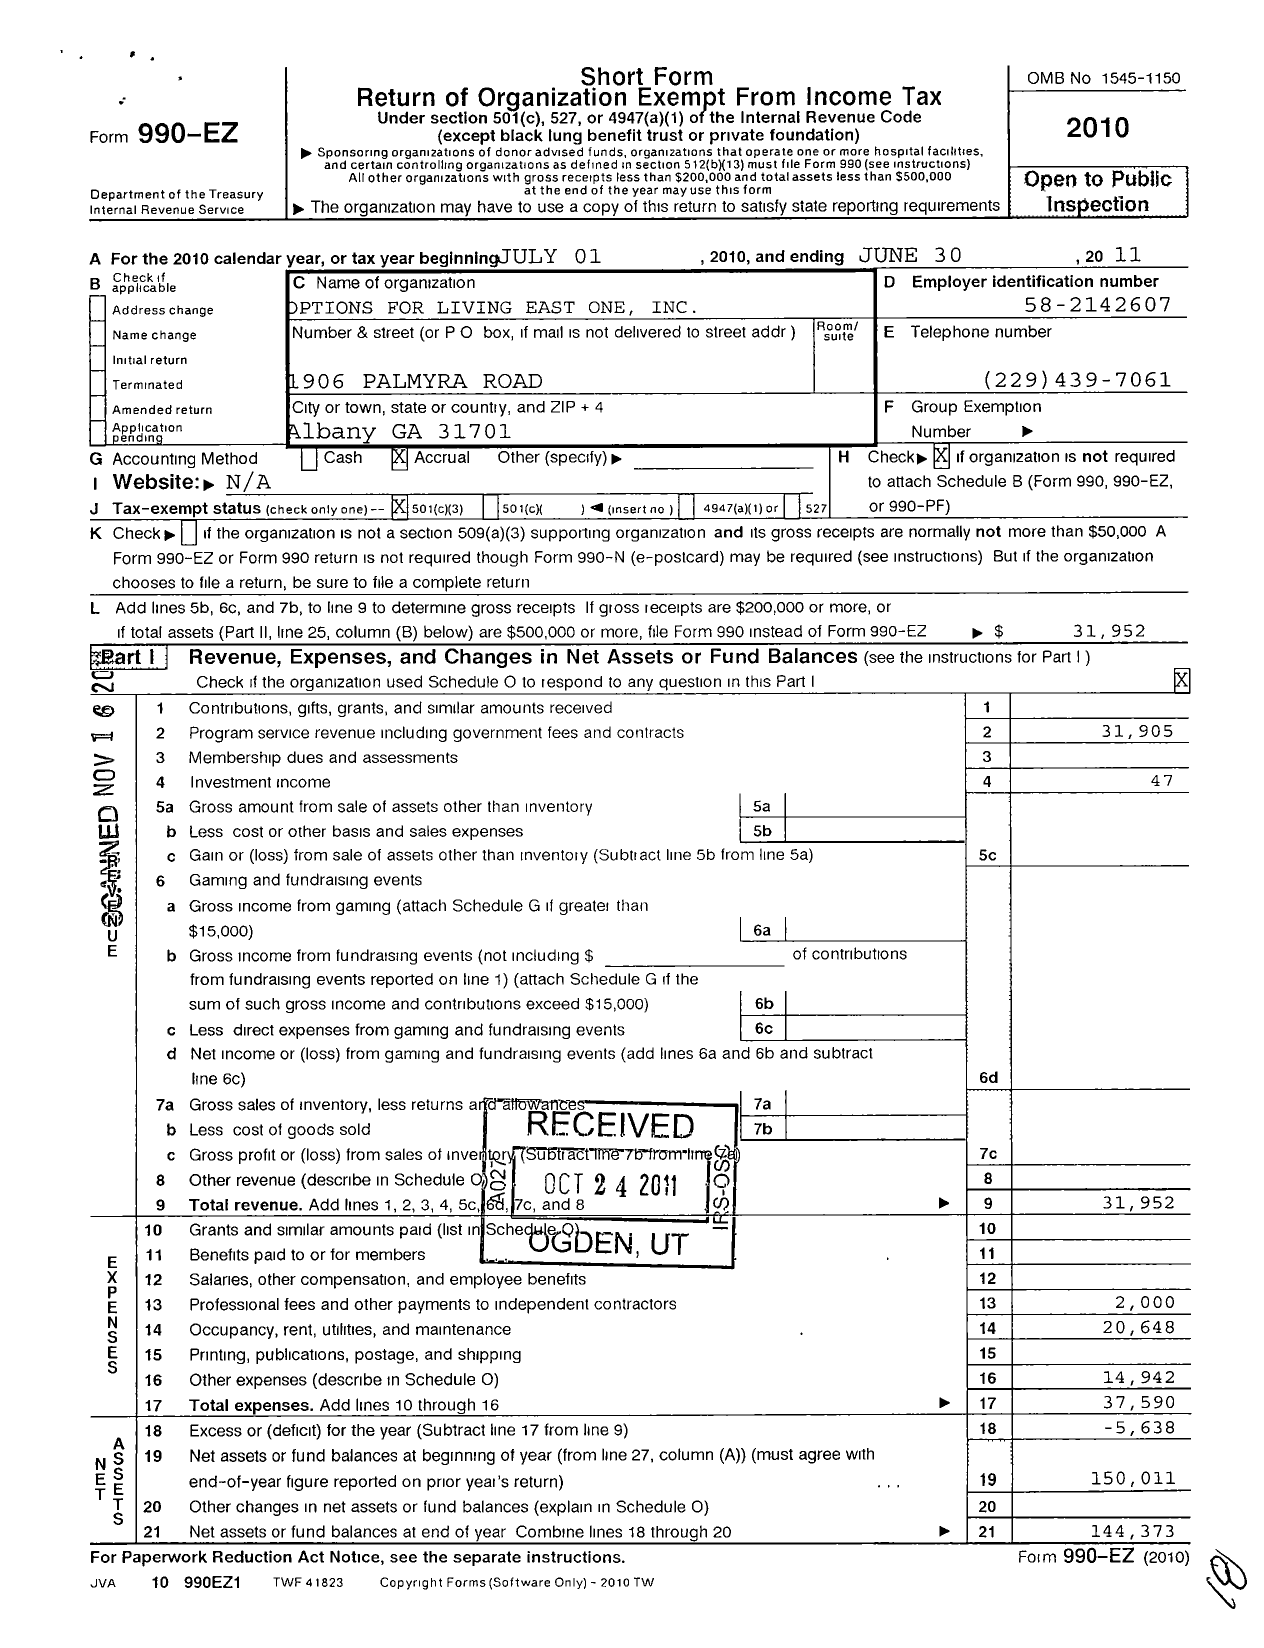 Image of first page of 2010 Form 990EZ for Options for Living East One